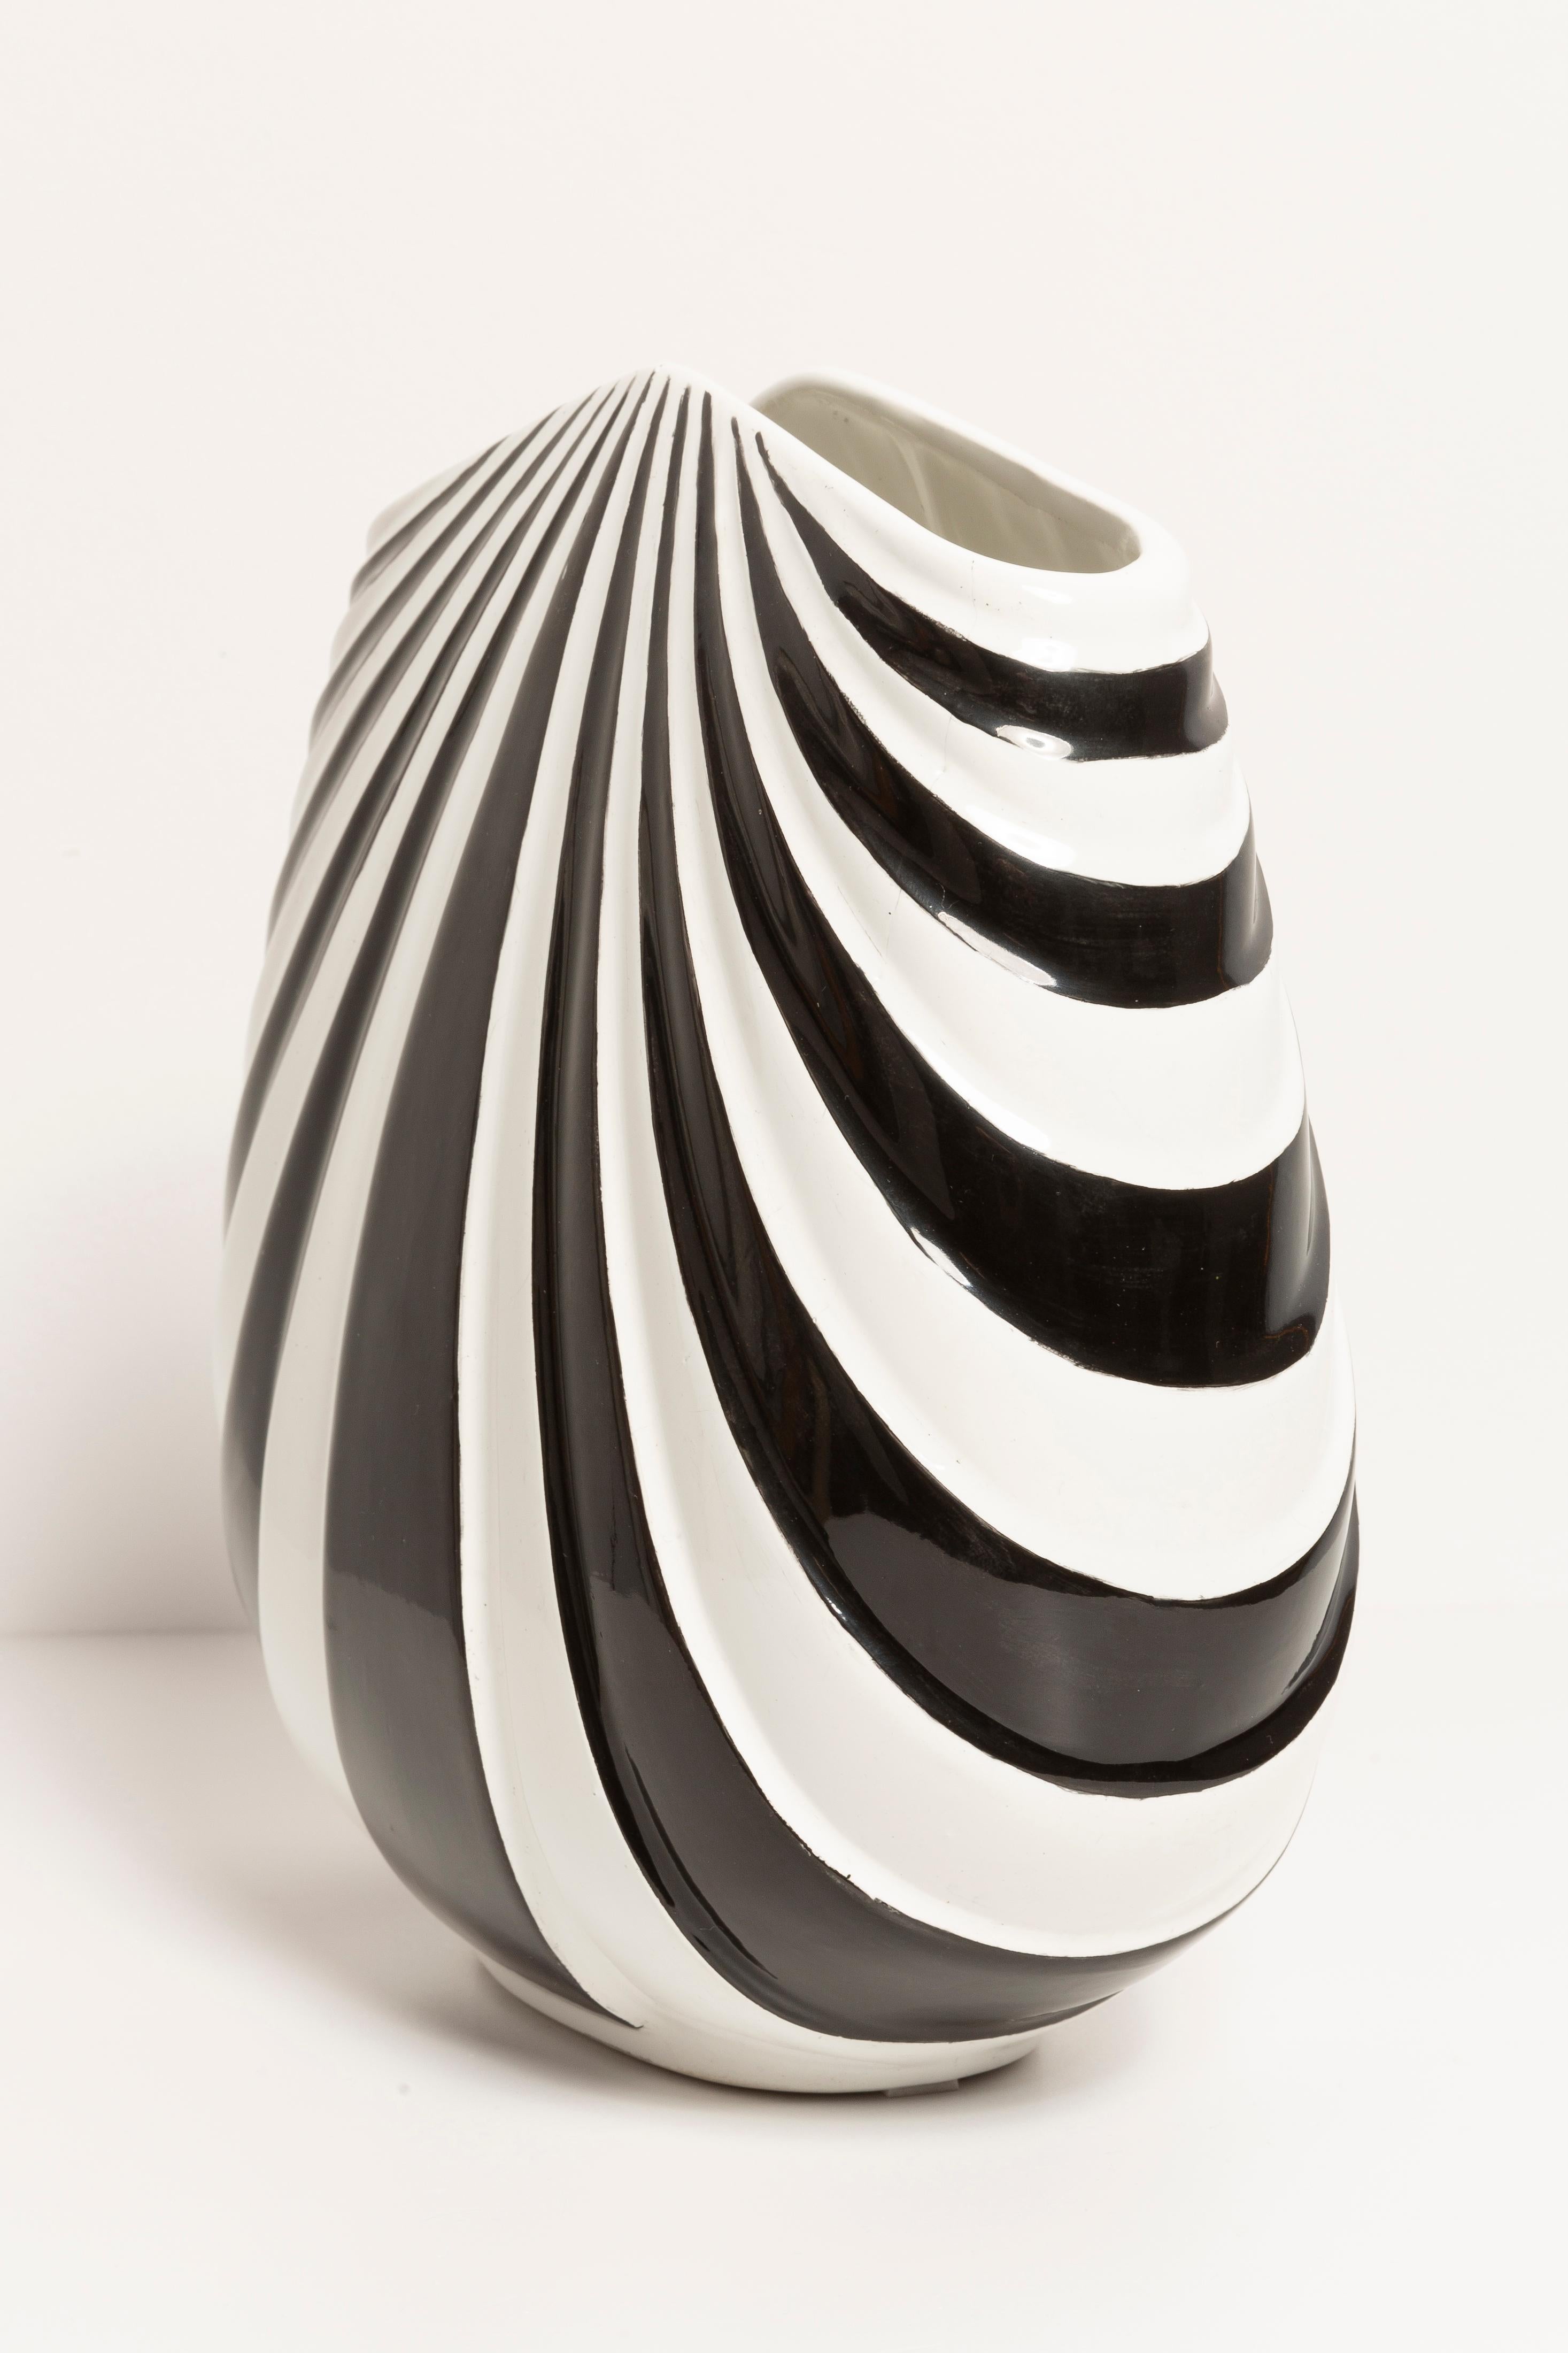 Unique Hand Painted Black and White Vase, 20th Century, Europe, 2000s For Sale 4